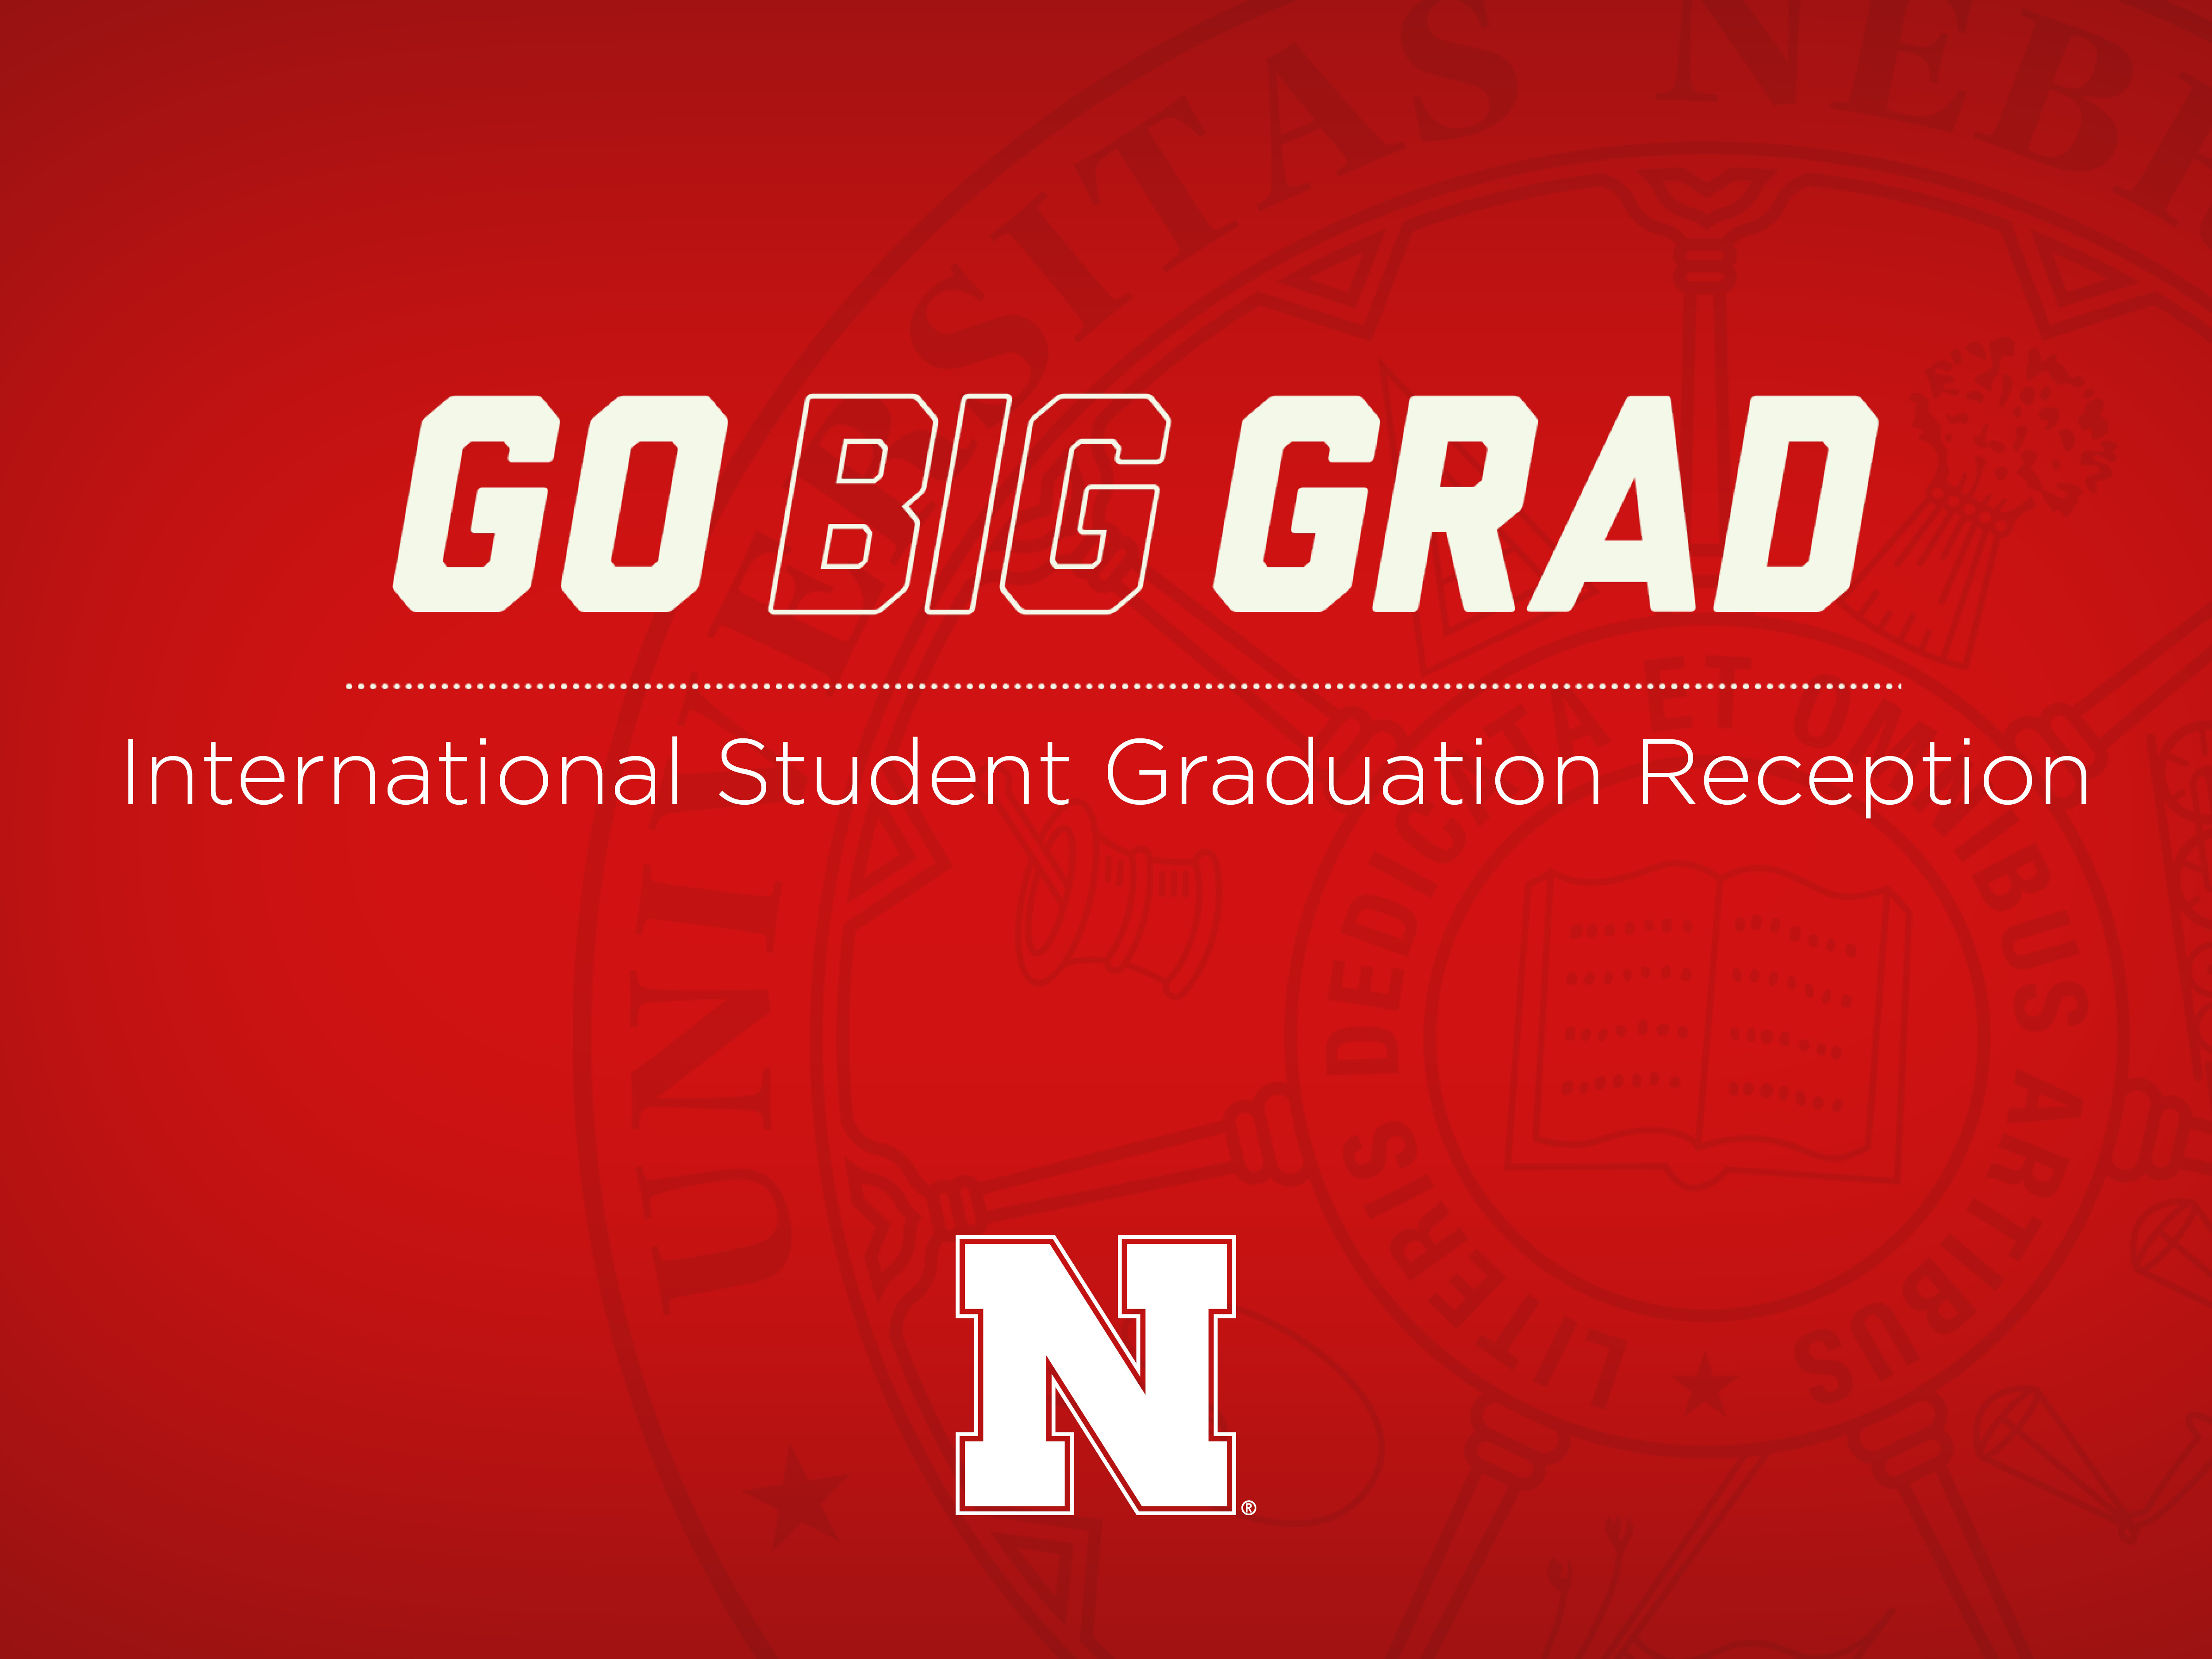 The 2019-20 International Student Graduation Reception was held online on May 9 and celebrated the more than 750 international graduates from Nebraska in the last year.